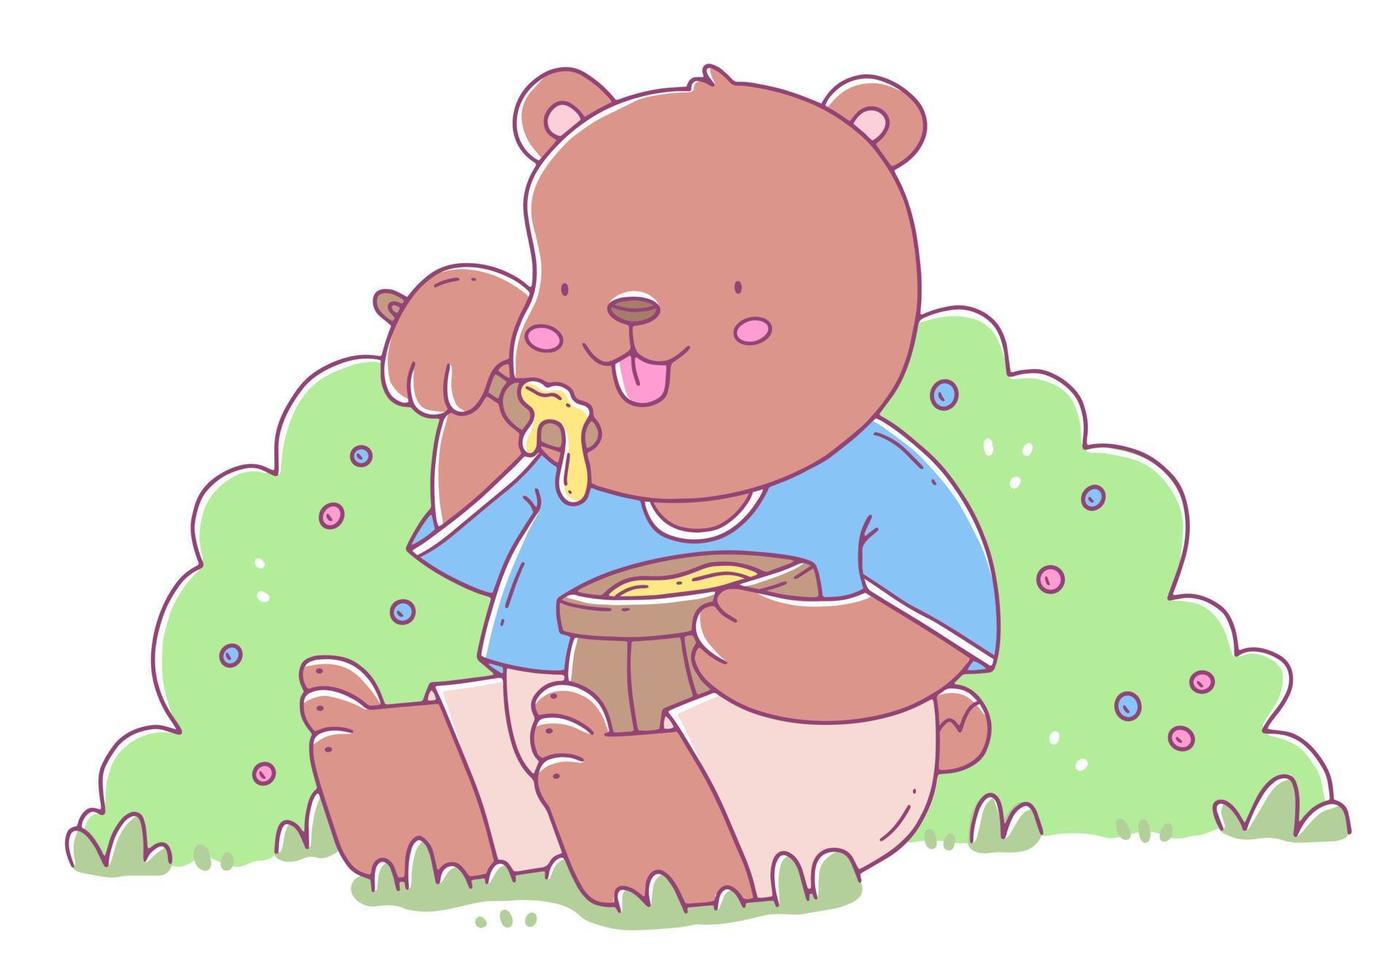 Cute color children's illustration with a sitting bear eating honey. Vector animal illustration.